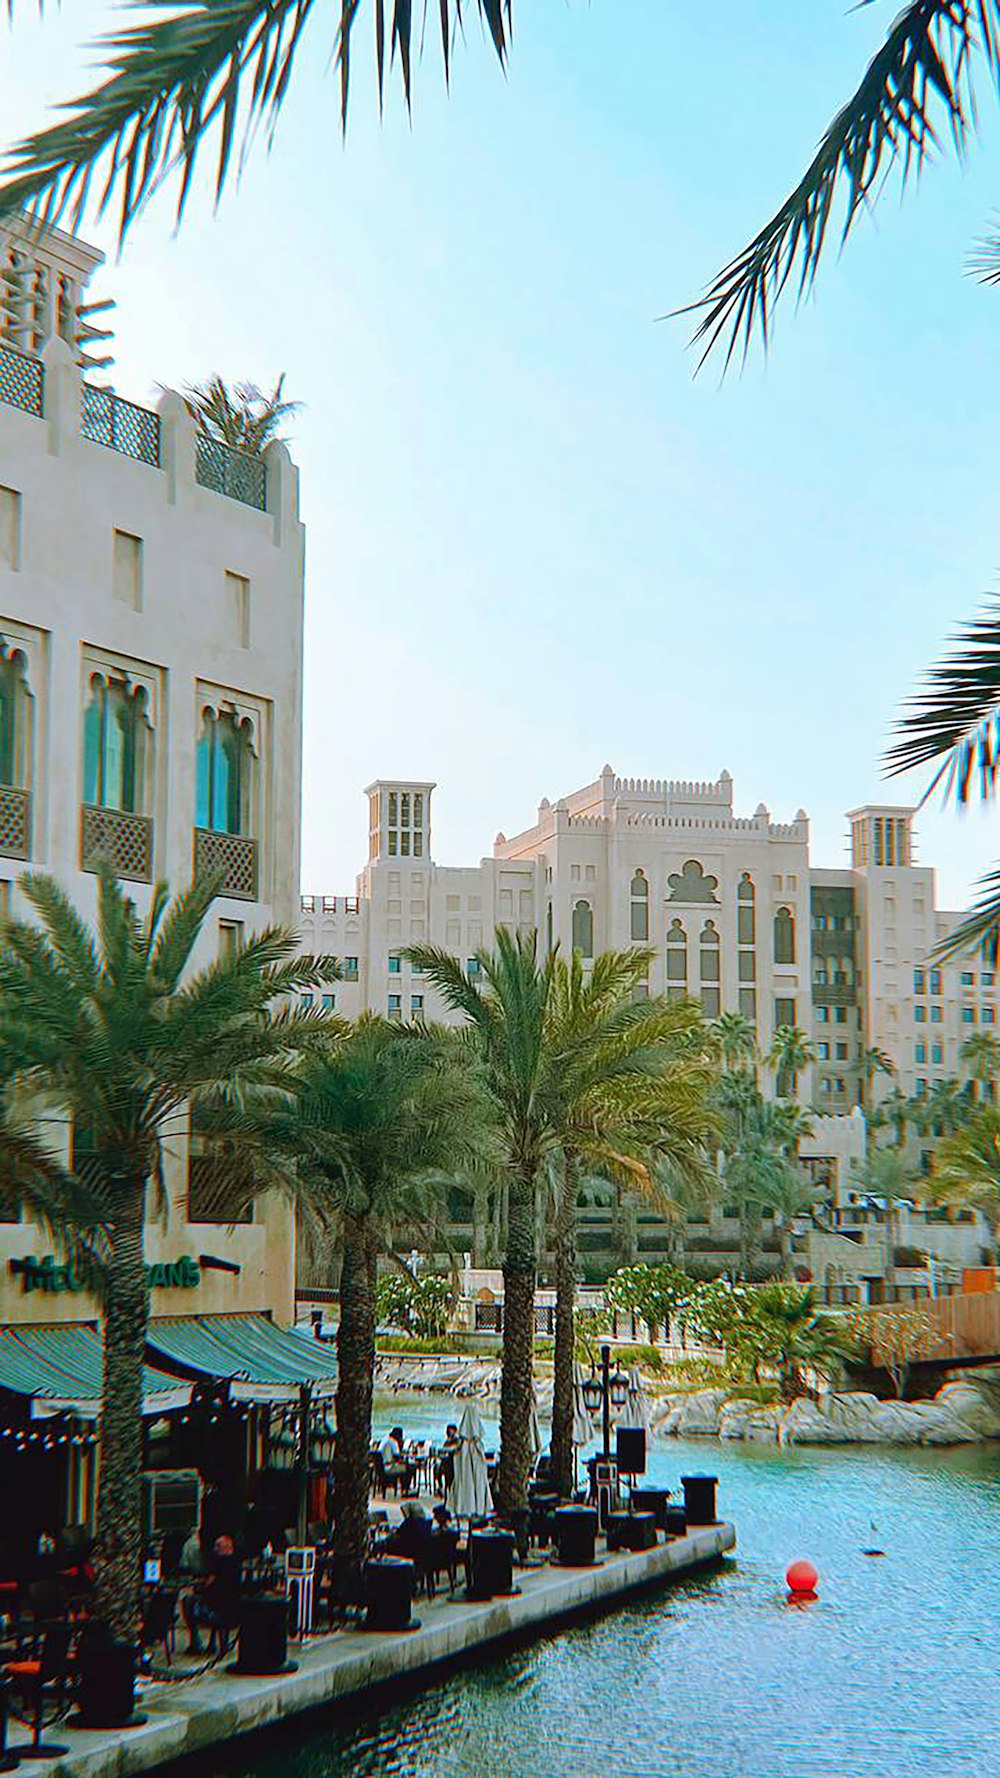 a waterway with palm trees and buildings in the background